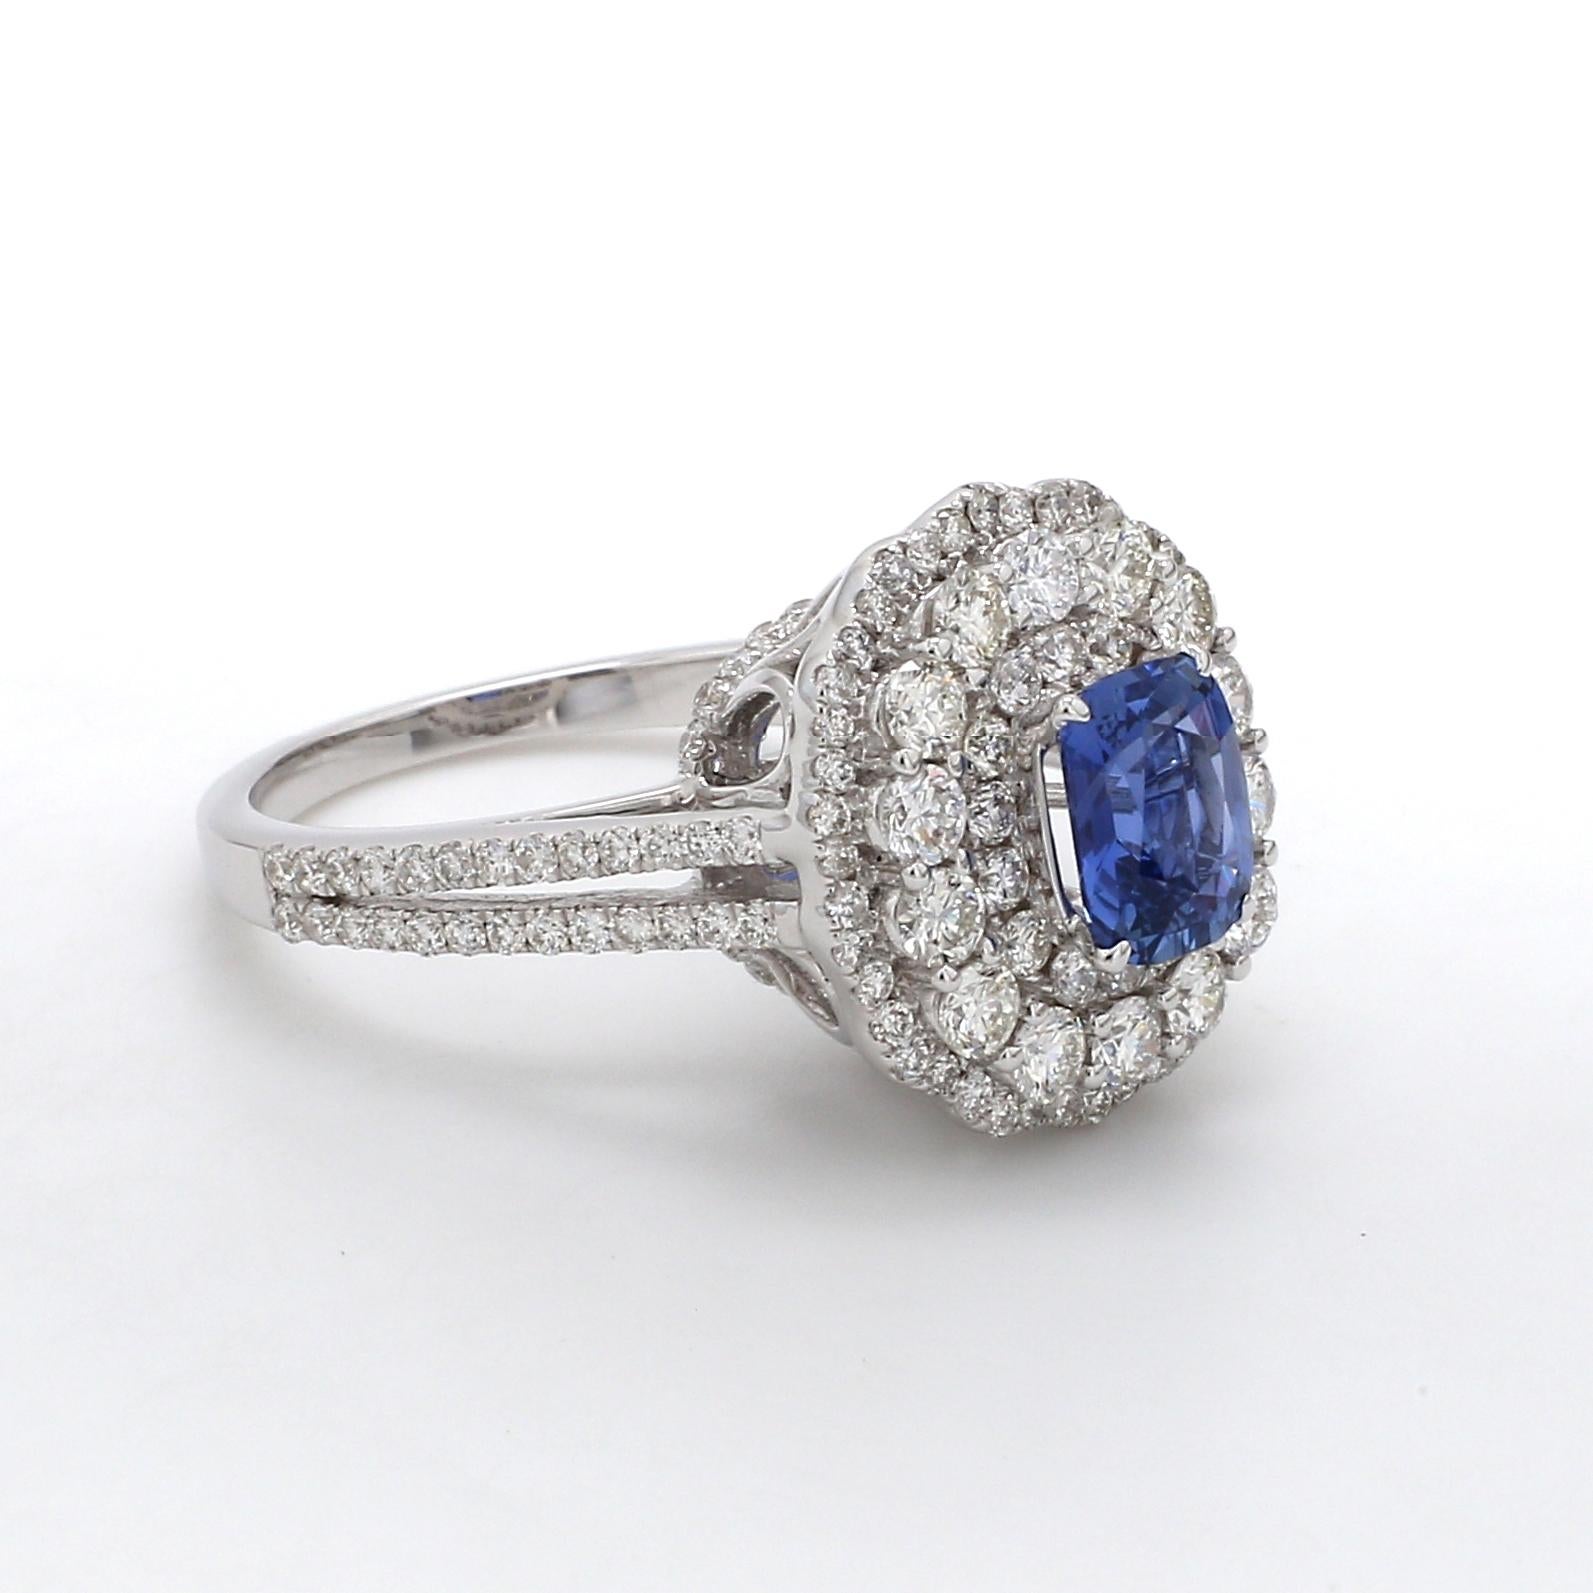 A Beautiful Handcrafted Ring in 18 karat White Gold  with Natural No Heat GRS Certified Blue Sapphire of Sri Lanka ( Ceylon) origin and Brilliant Cut Colorless Diamonds.

Sapphire Details
Weight: 1.30 carats
Accompanied by GRS certificate